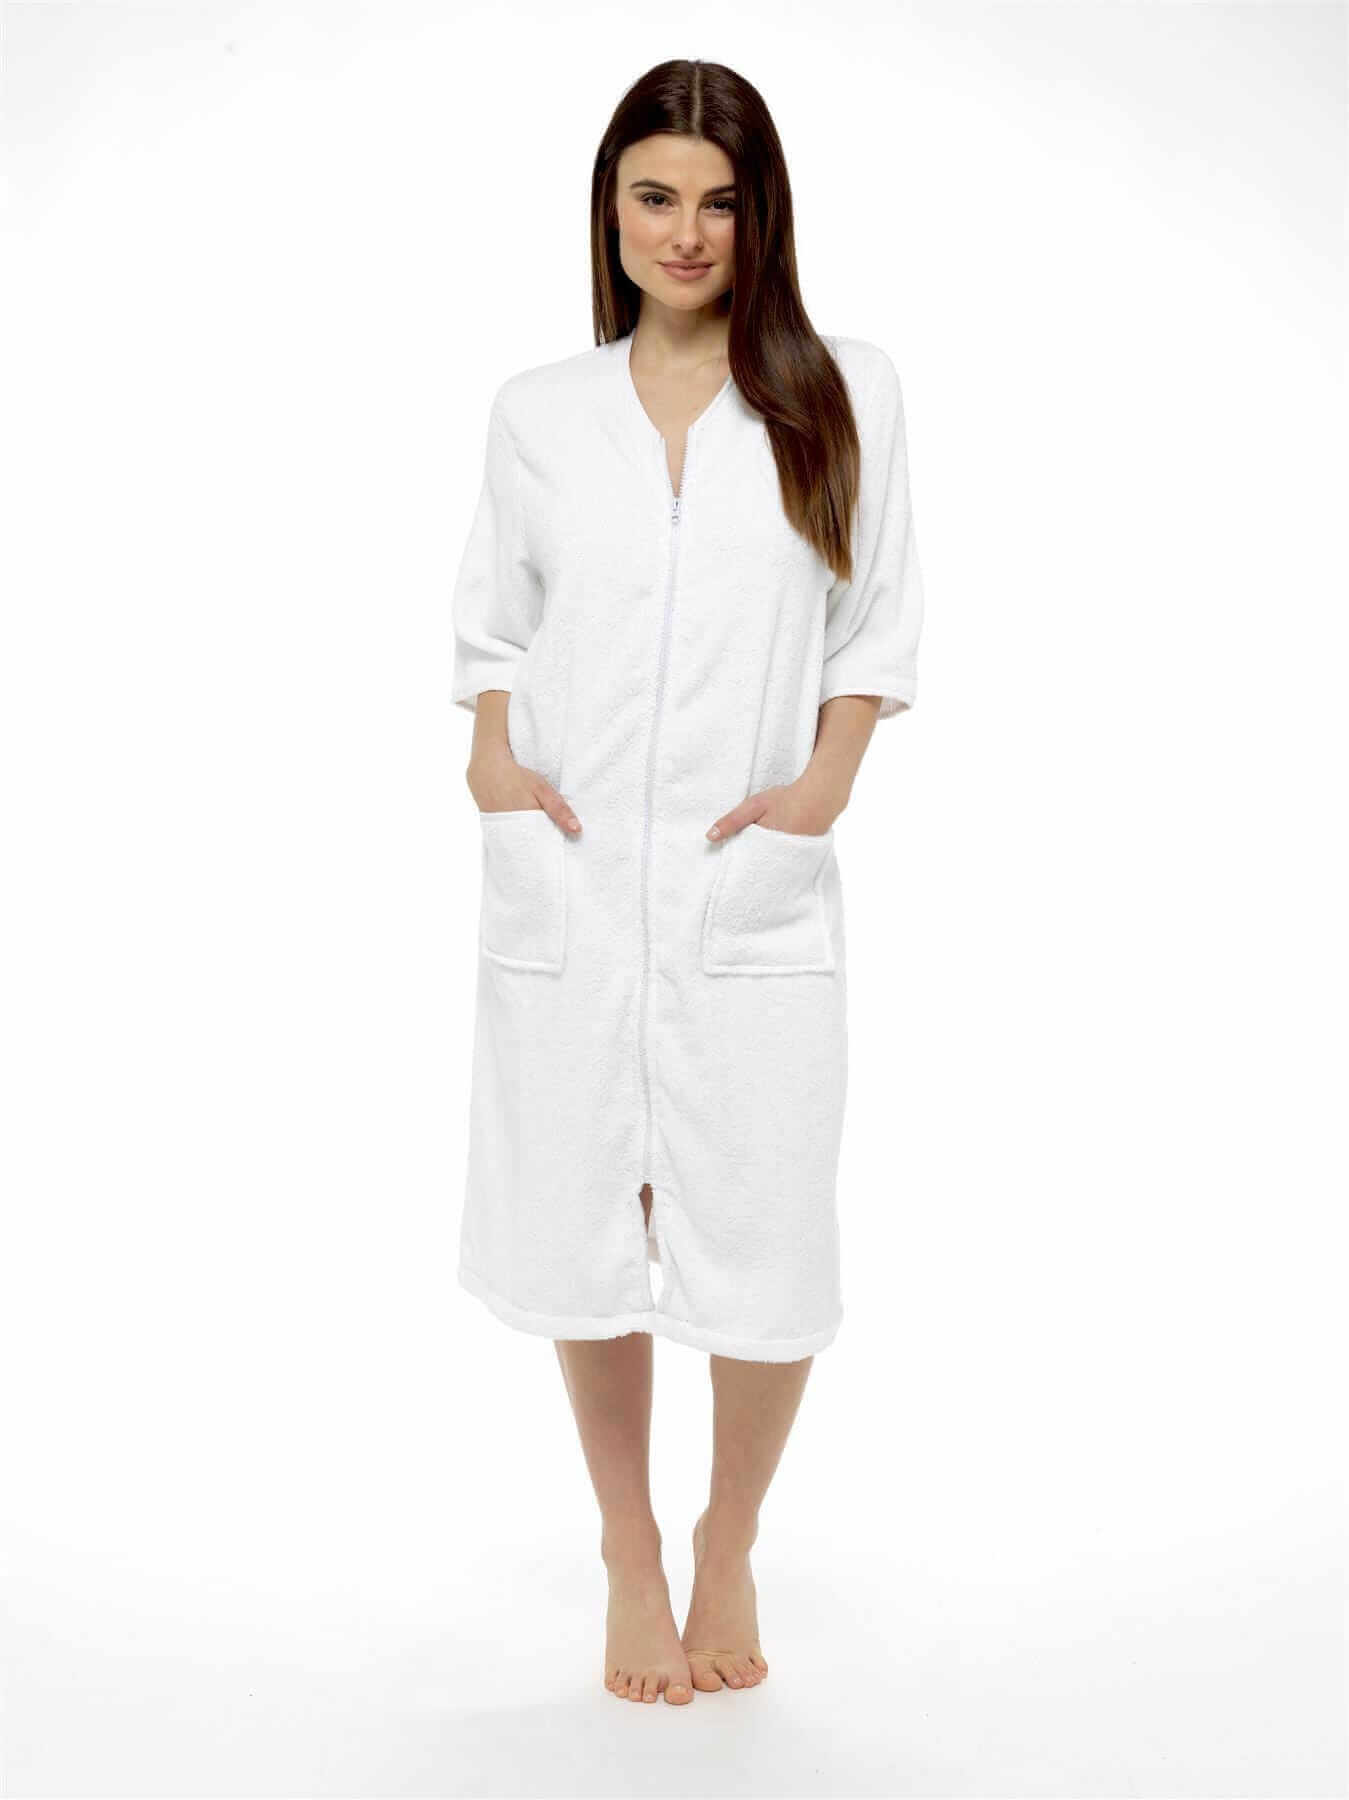 Women's Terry Towelling Zip Through Bath Robe, 100% Cotton Dressing Gown. Buy now for £20.00. A Robe by Daisy Dreamer. 12-14, 16-18, 20-22, 8-10, bath robe, bridesmaid, cotton, dressing gown, gym, hotel, ladies, lilac, loungewear, mint, navy, nightwear, p